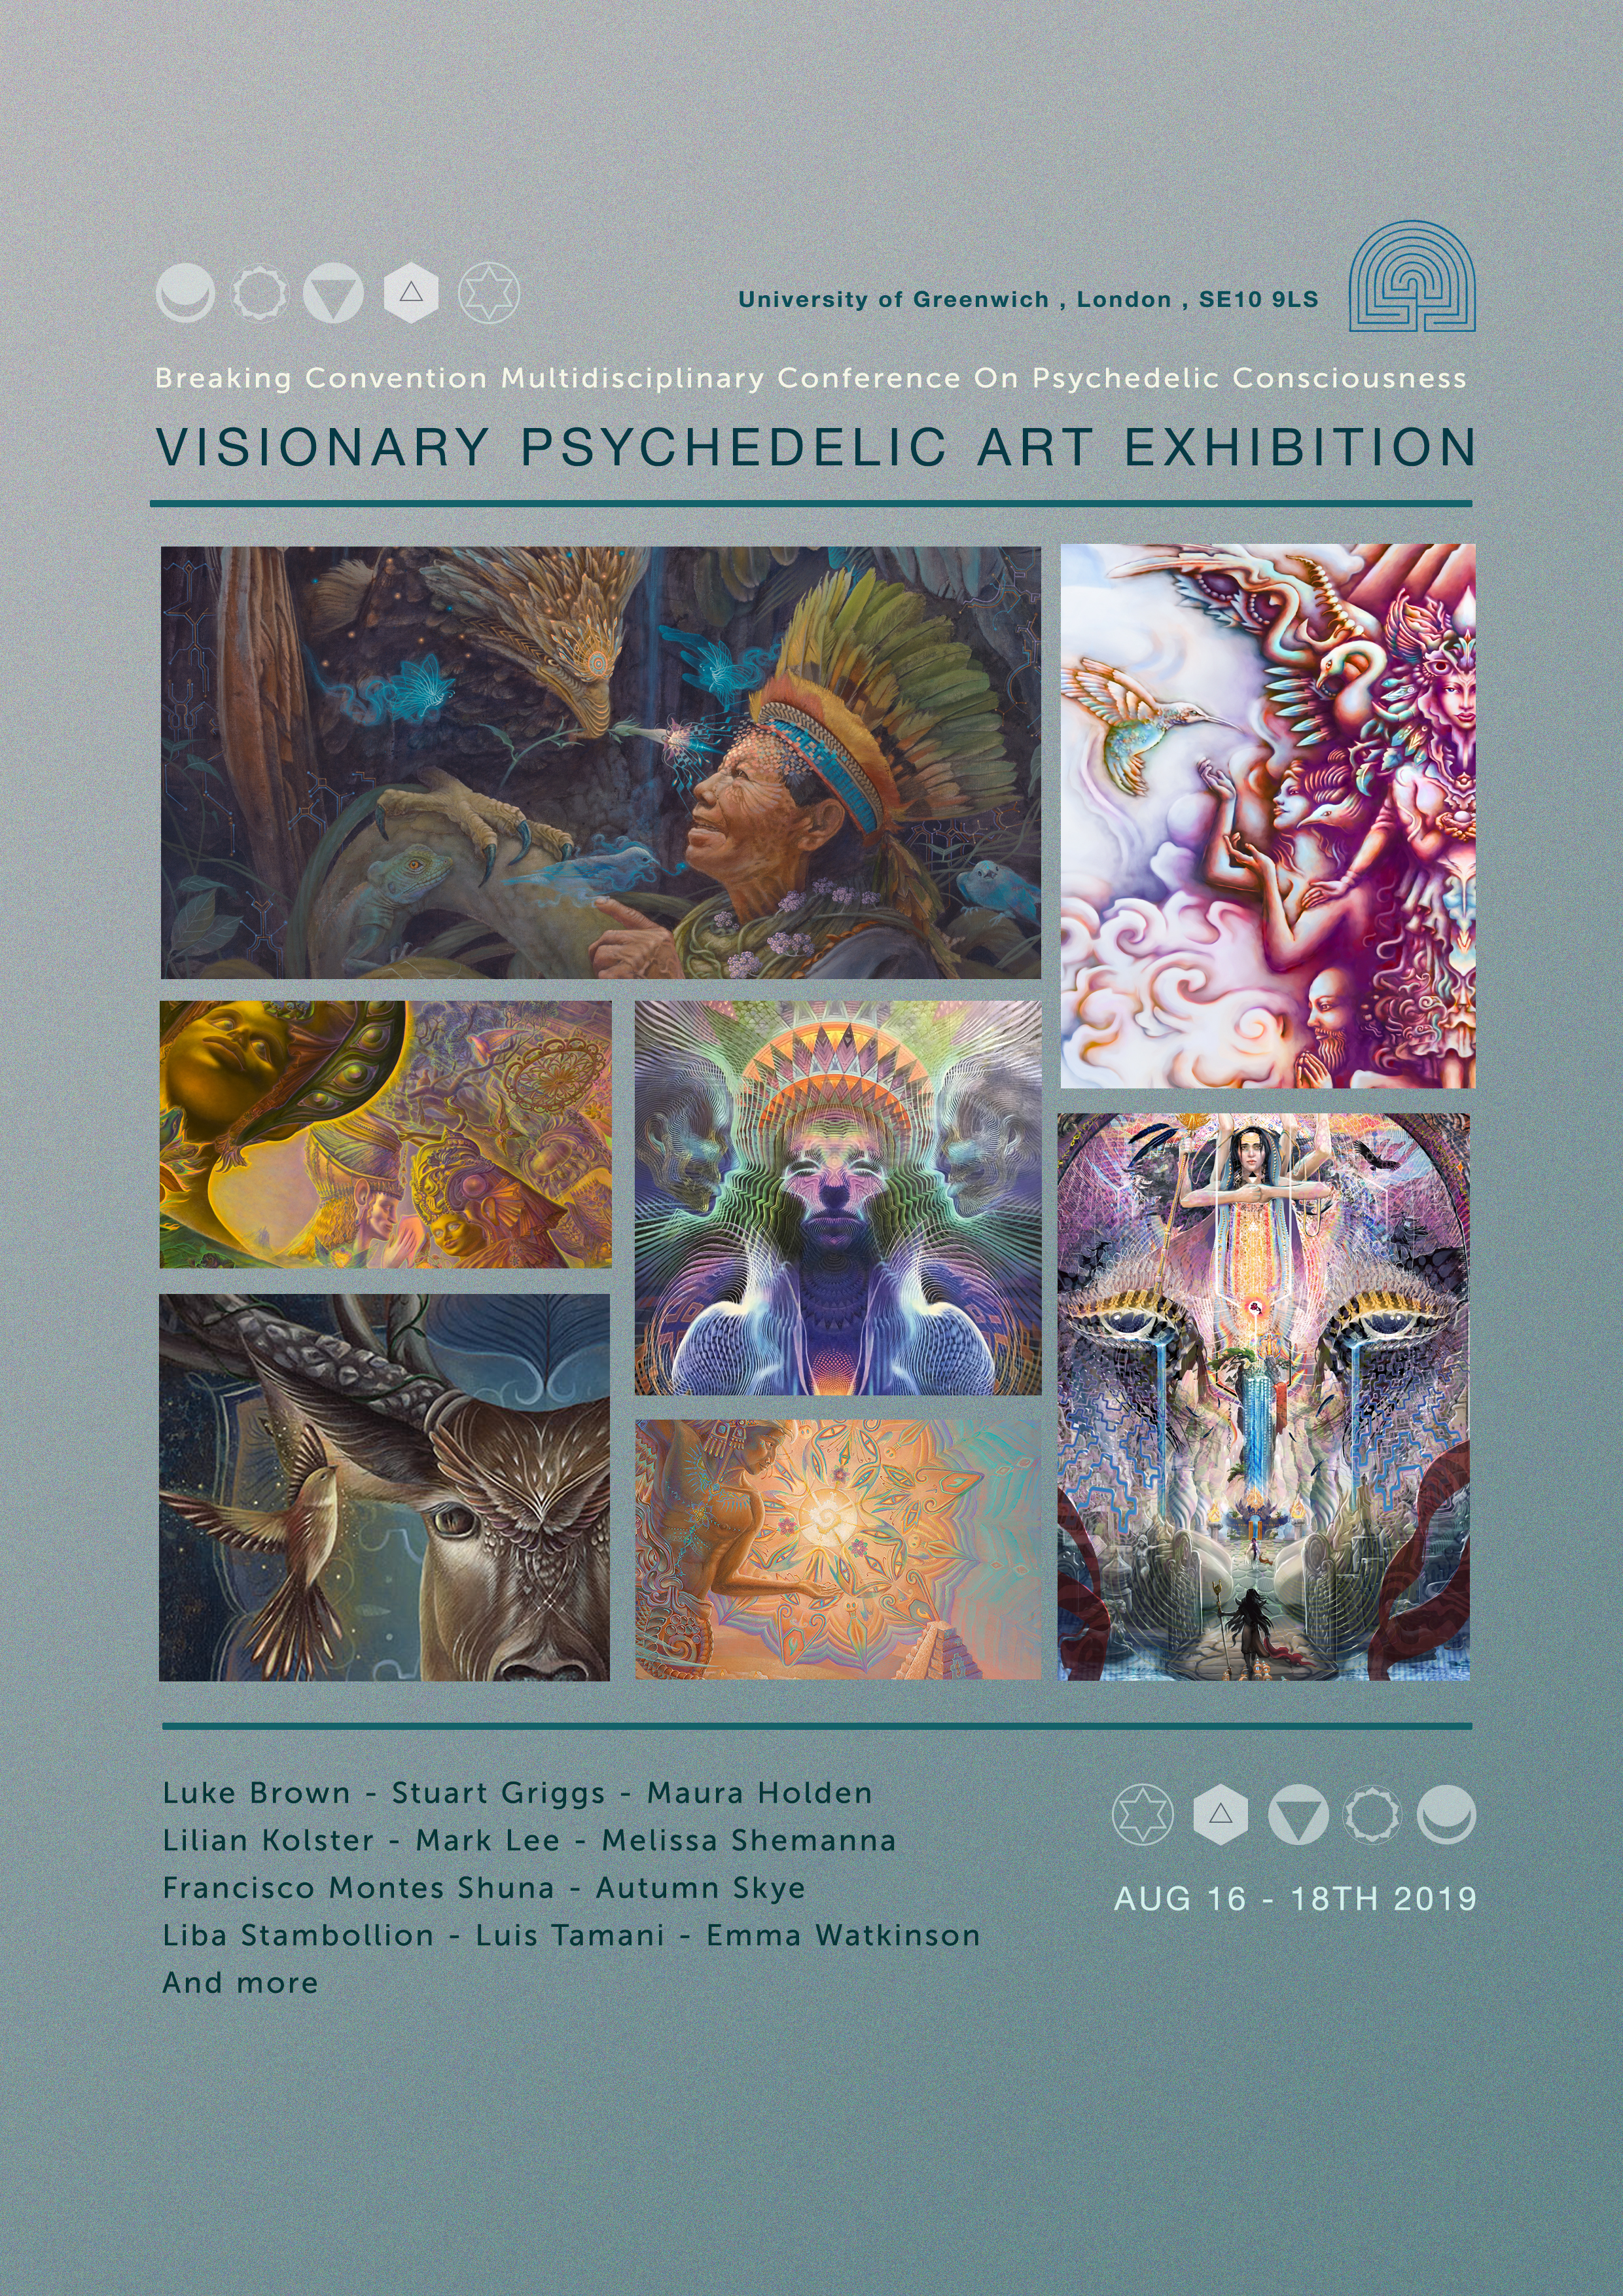 Breaking Convention 2019 Visionary Art Exhibition